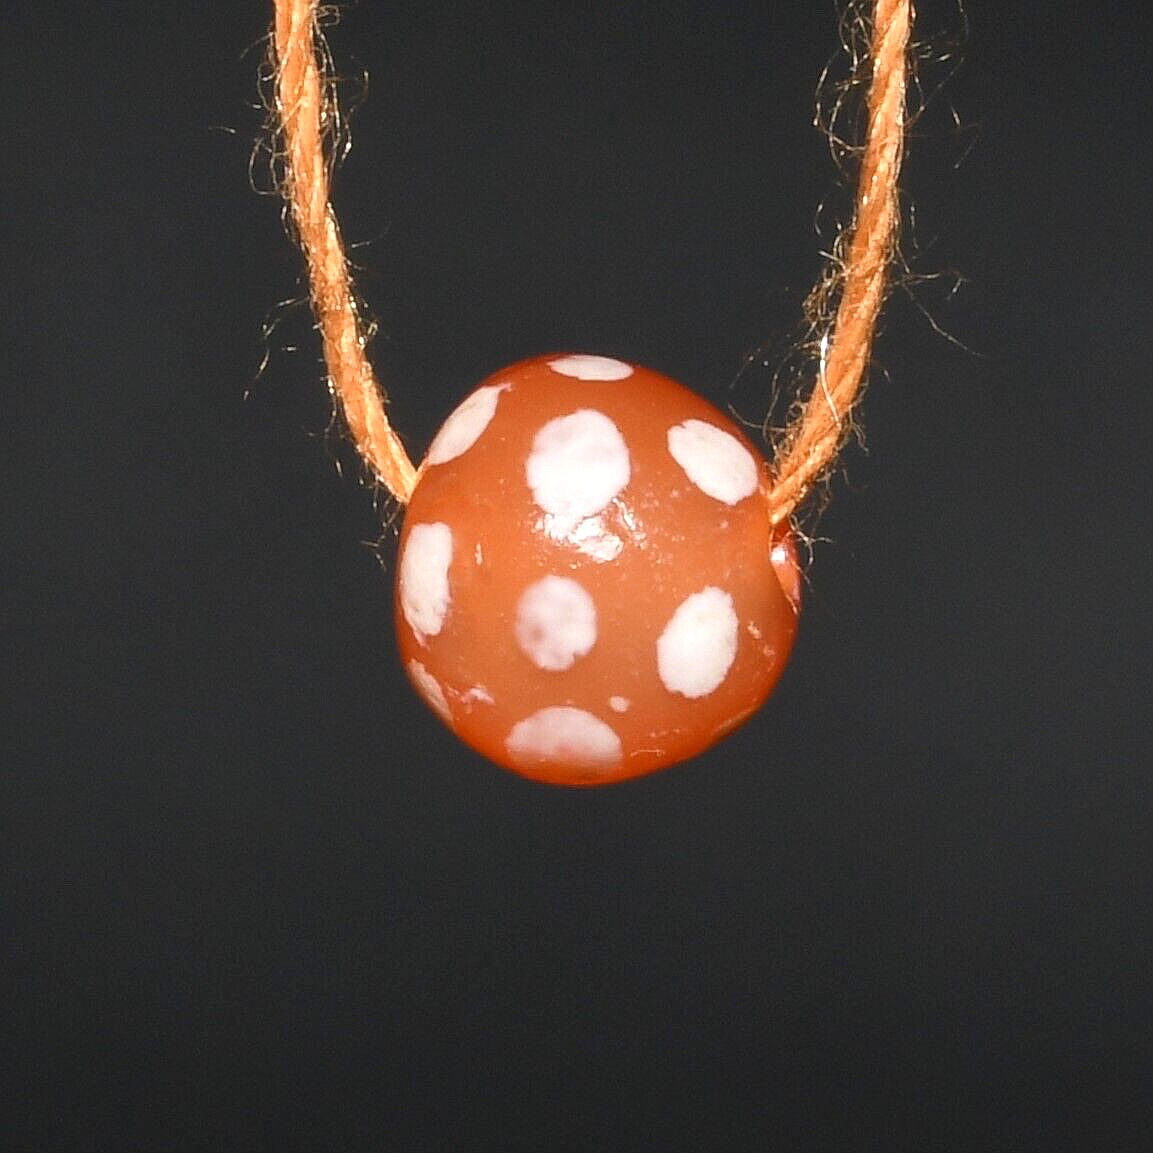 Extremely Rare Ancient Round Etched Carnelian Bead with Dotted Pattern